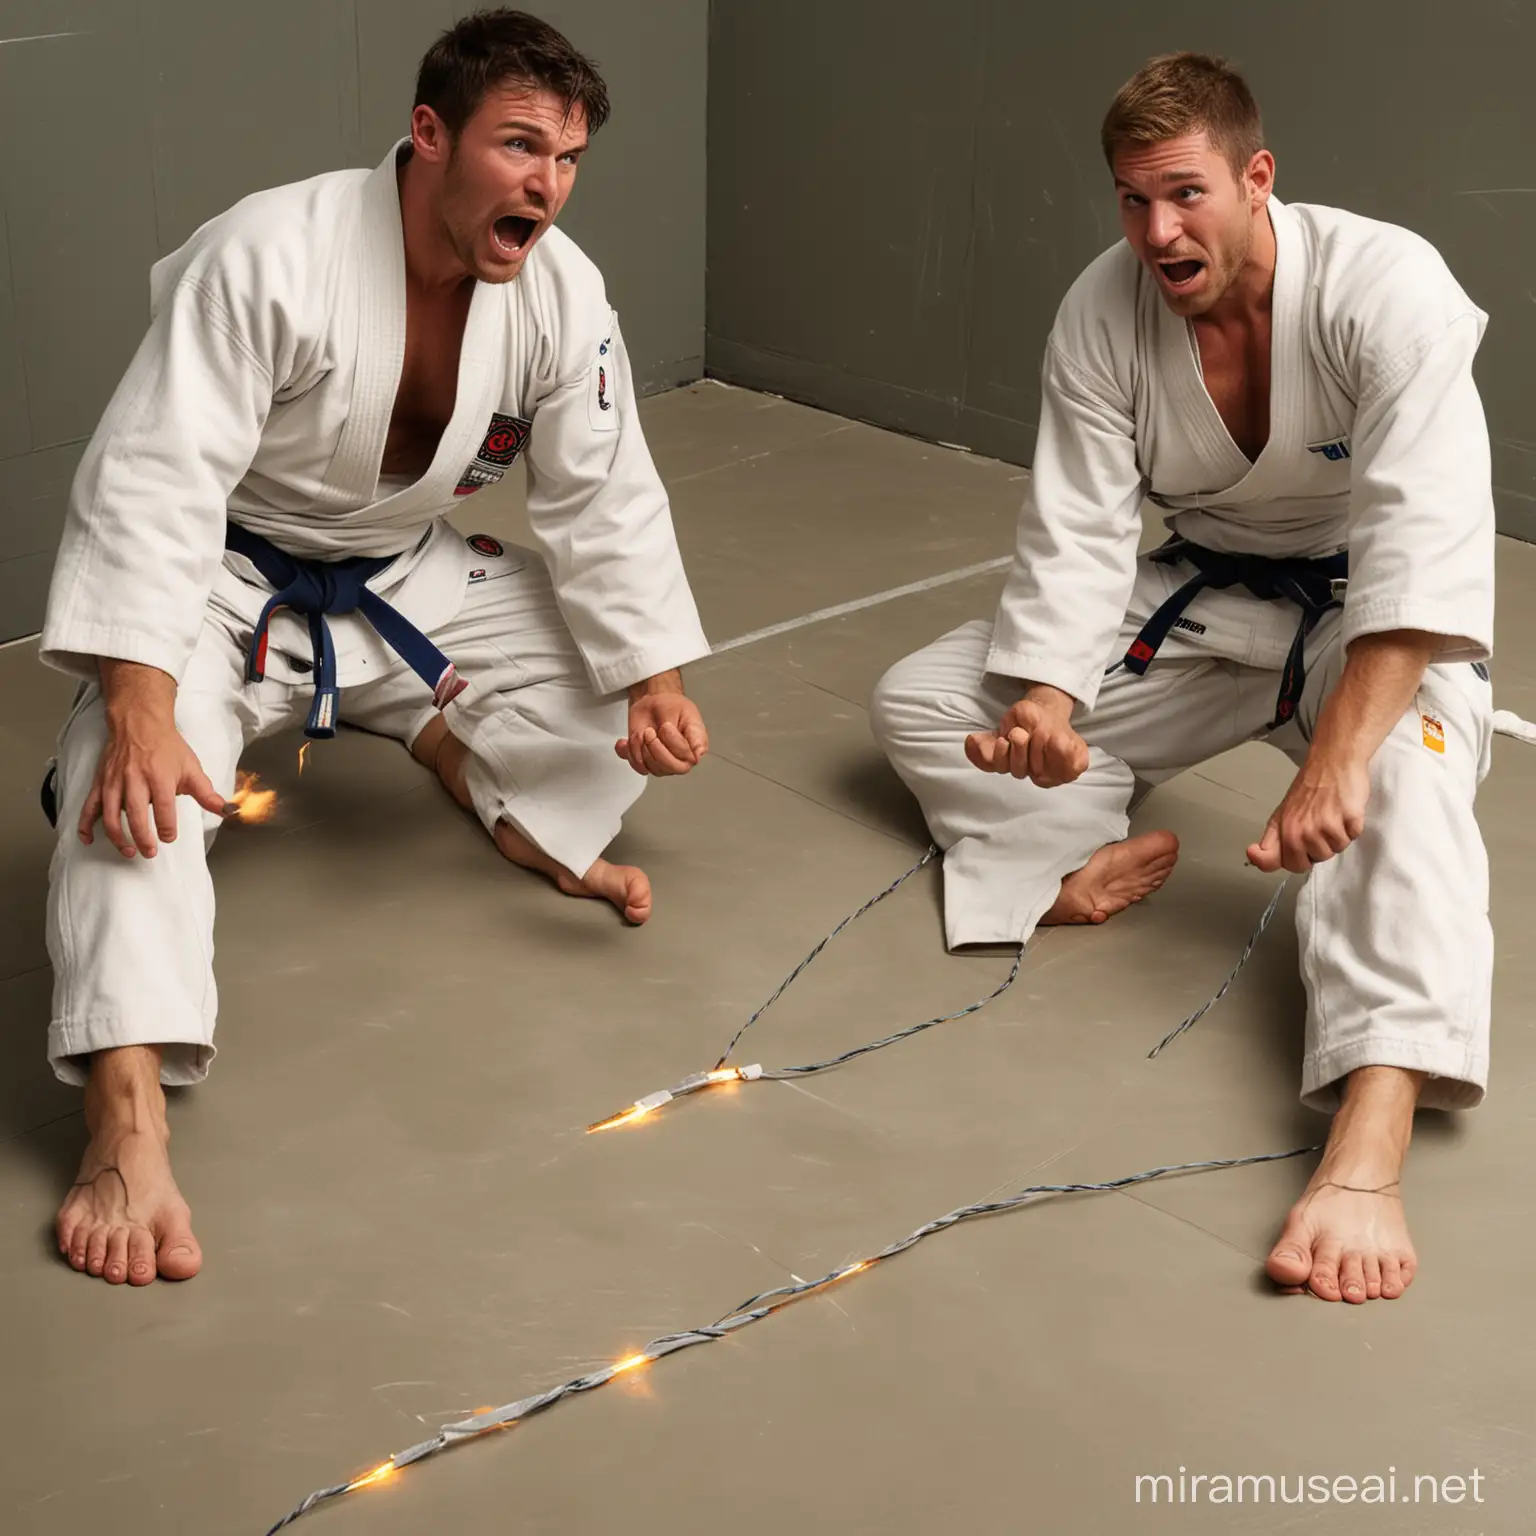 Two Male Friends Shocked by Electric Current at Judo Training